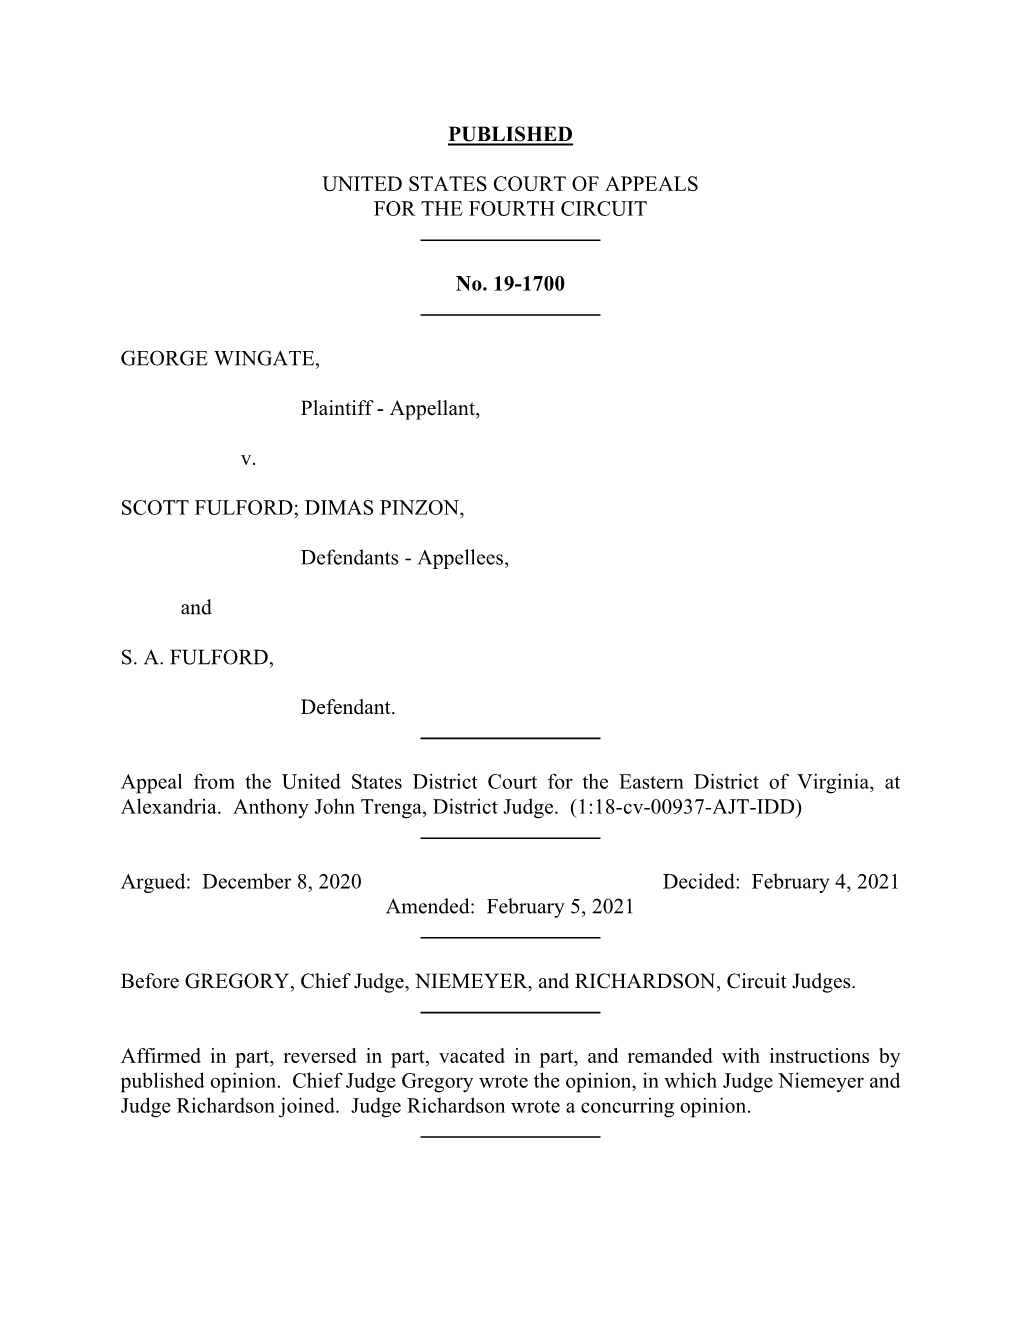 PUBLISHED UNITED STATES COURT of APPEALS for the FOURTH CIRCUIT No. 19-1700 GEORGE WINGATE, Plaintiff